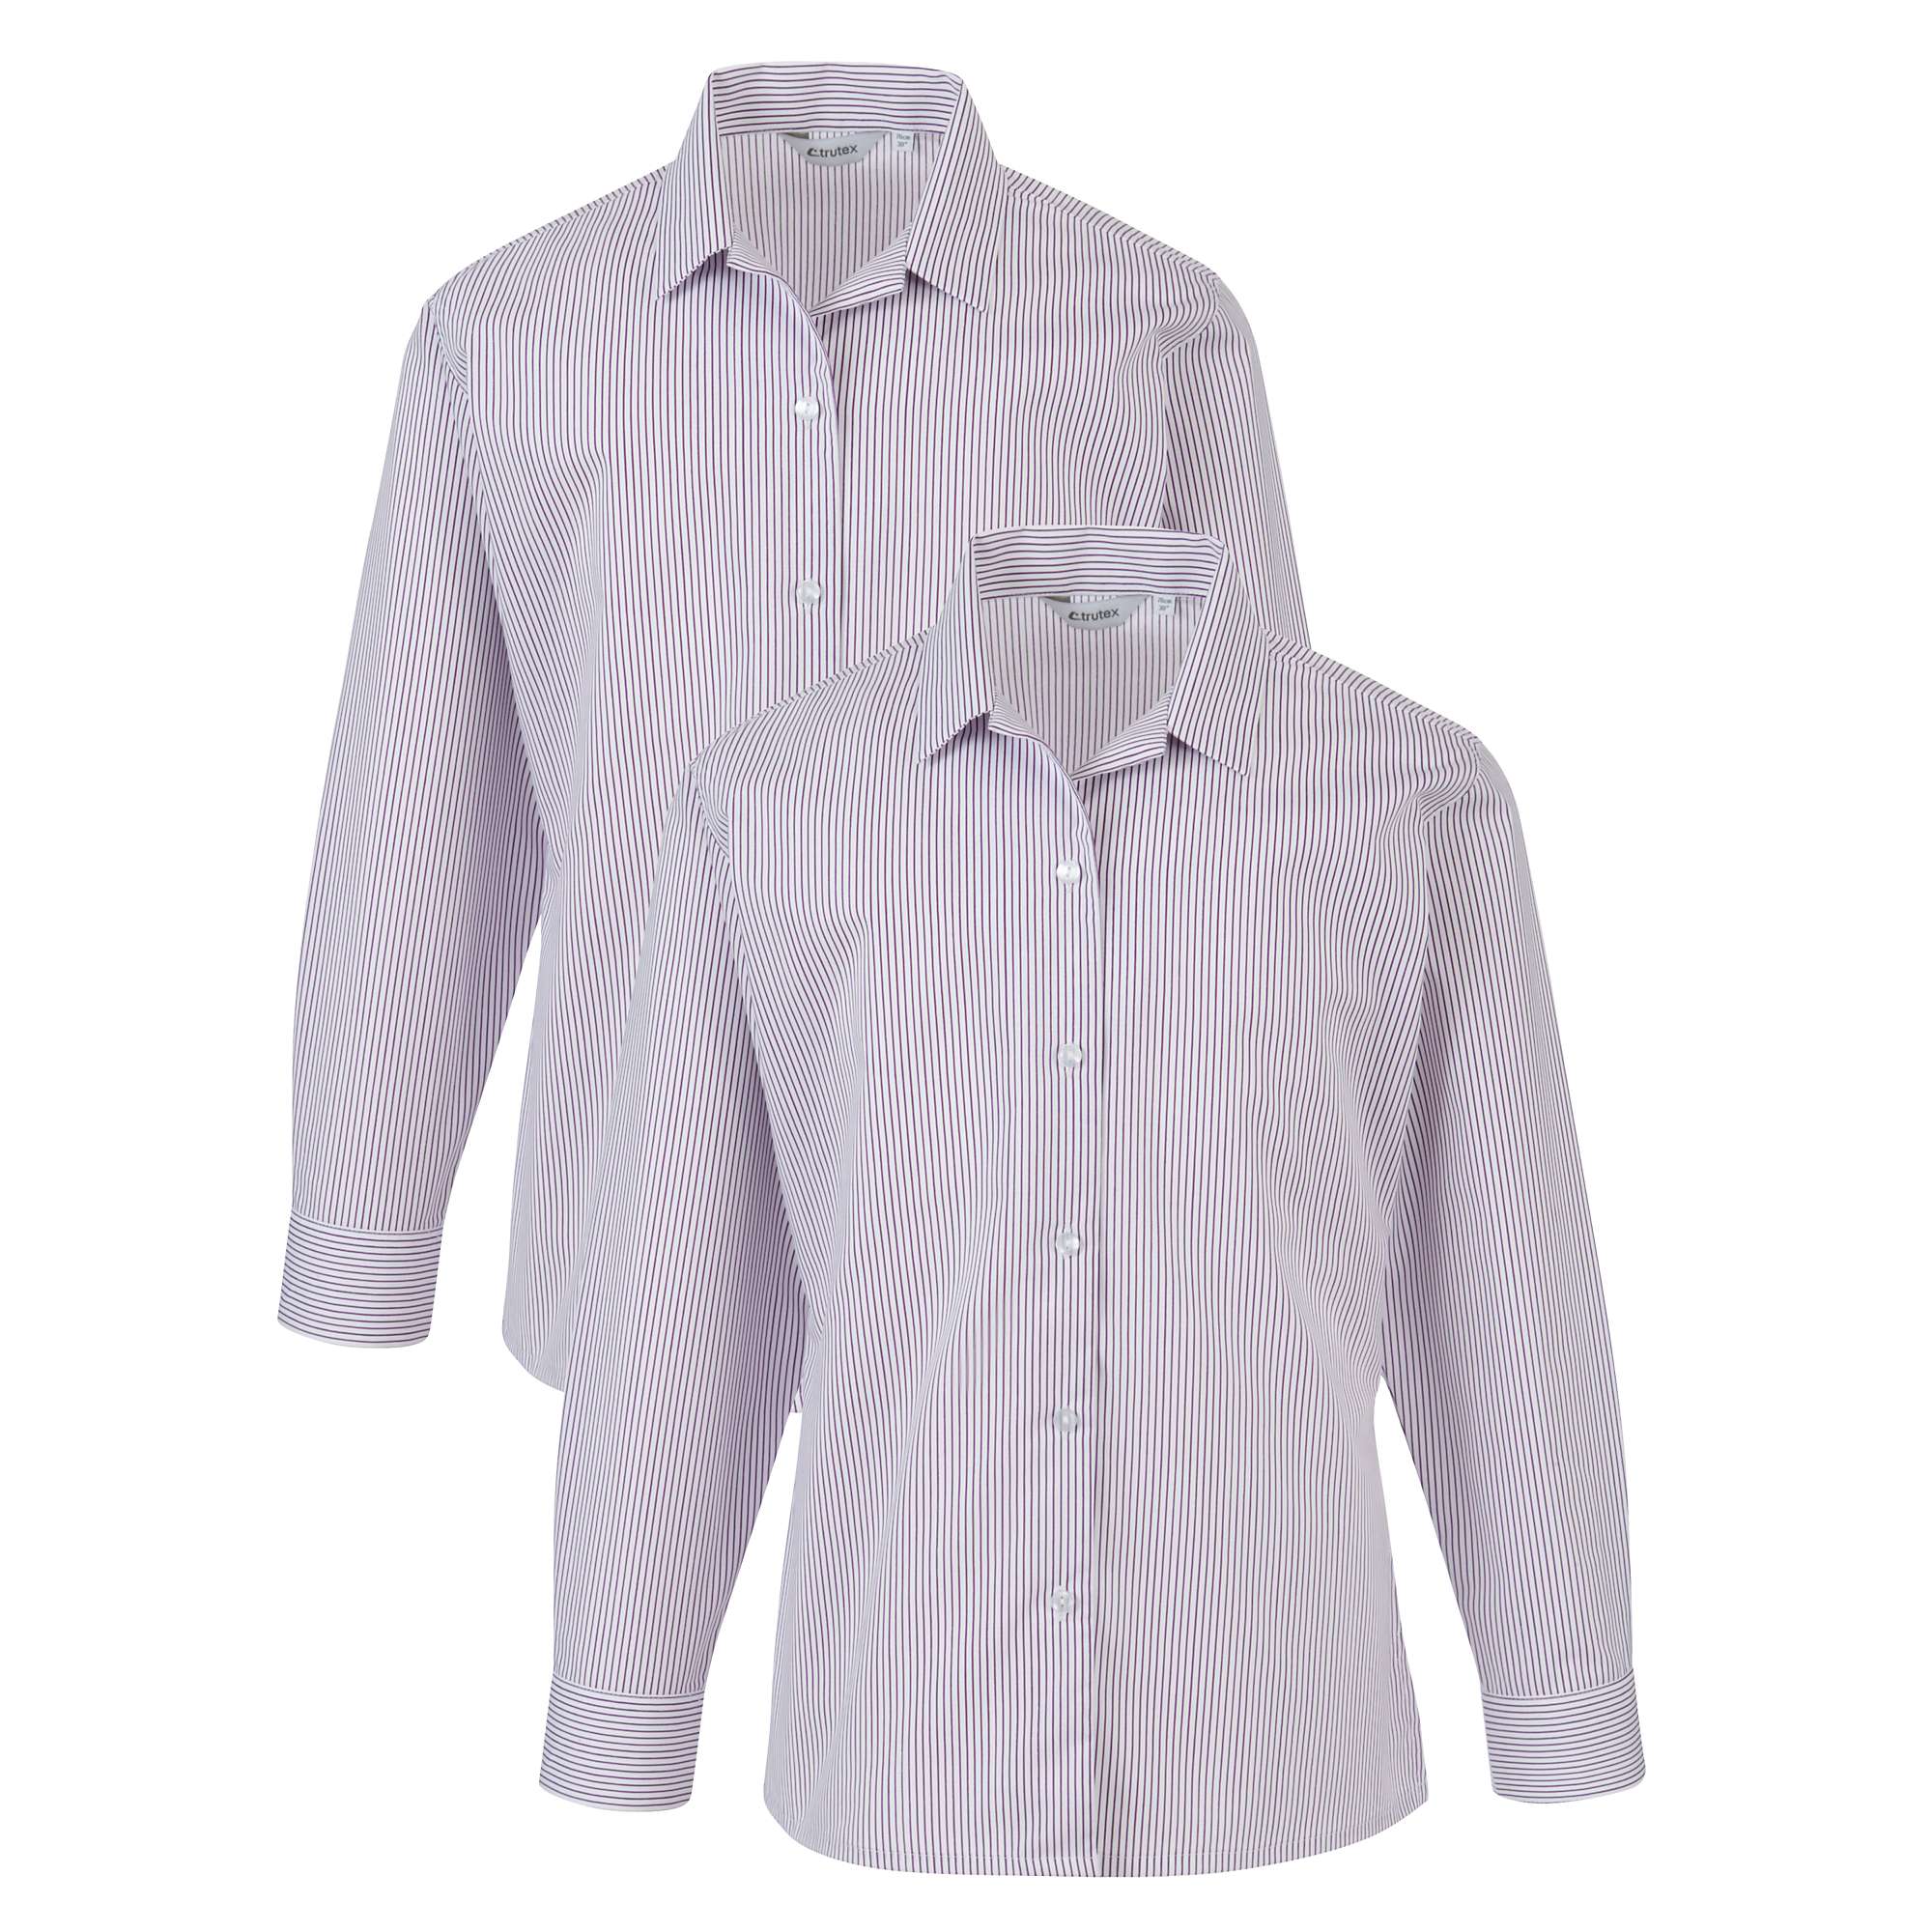 Buy The Perse Upper School Girls' Long Sleeved Revere Collar Blouse, Pack of 2, Purple Online at johnlewis.com